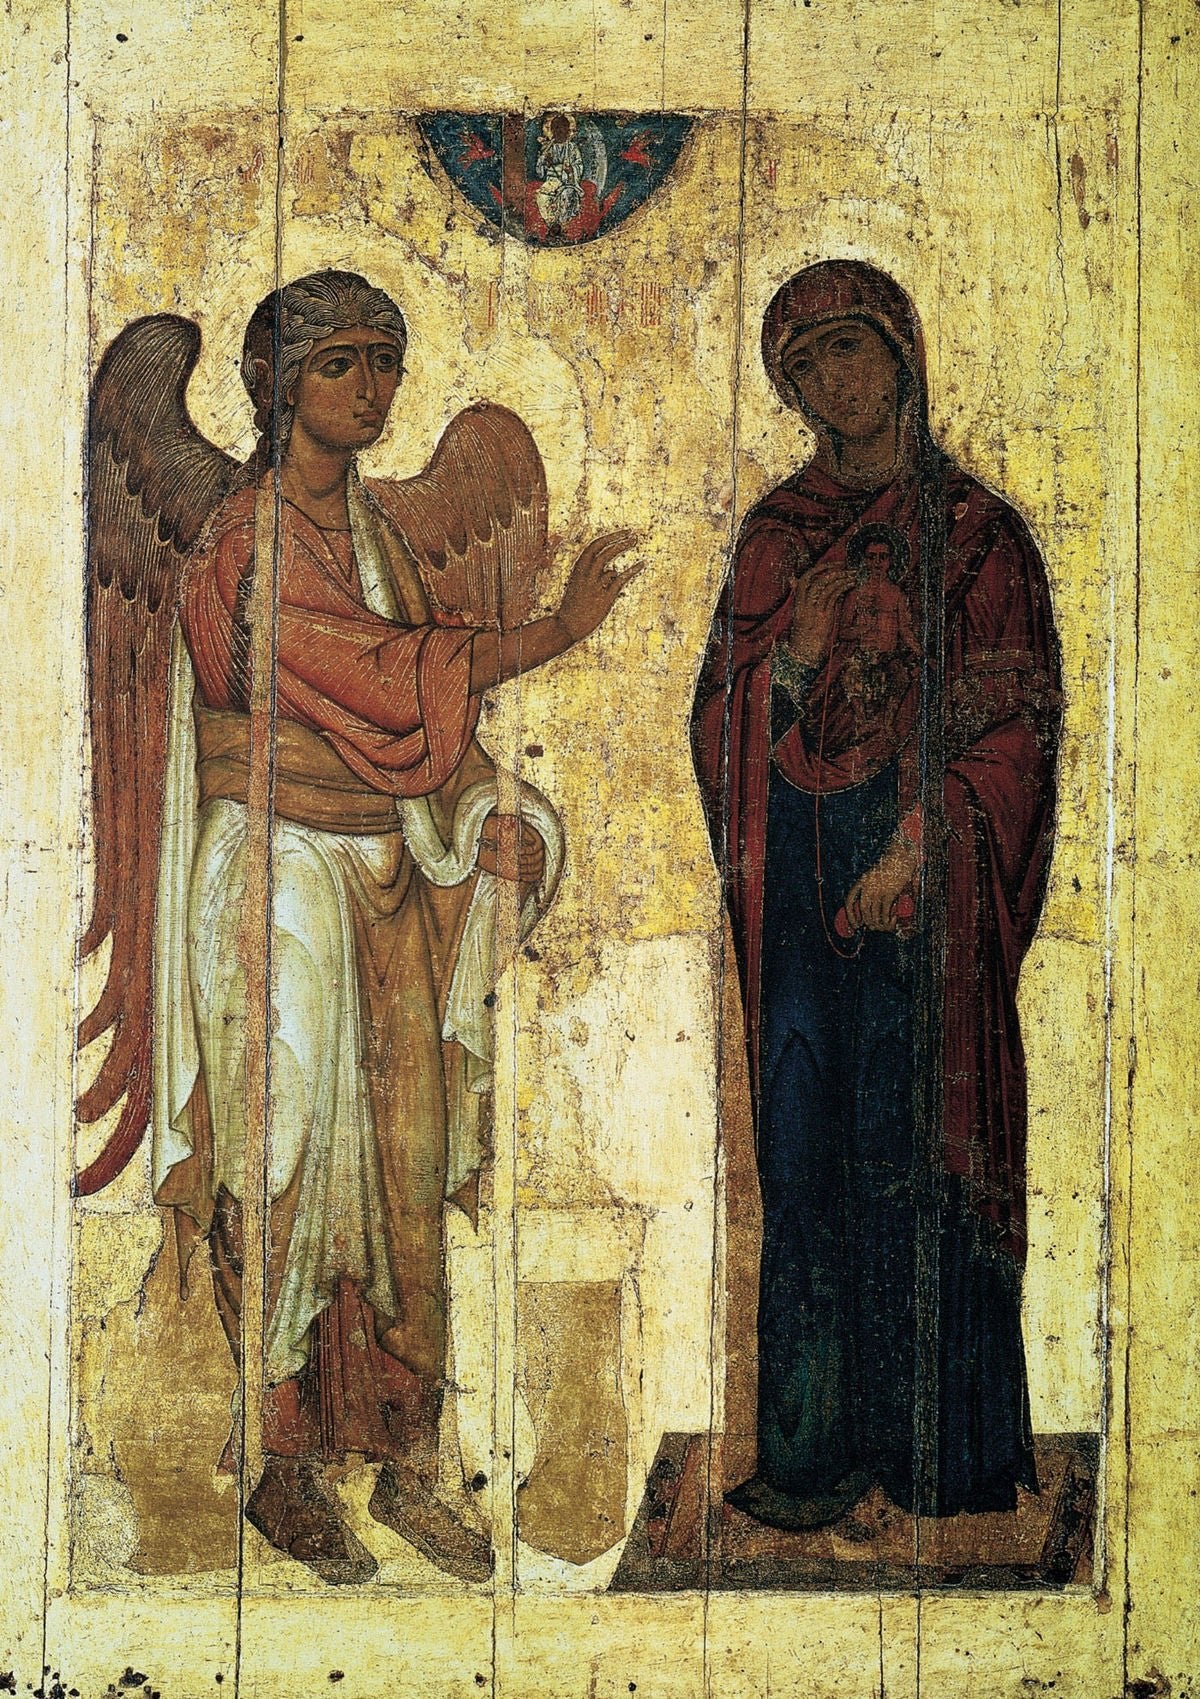 May It Be Done Unto Me - A Sermon for the Annunciation (2021)